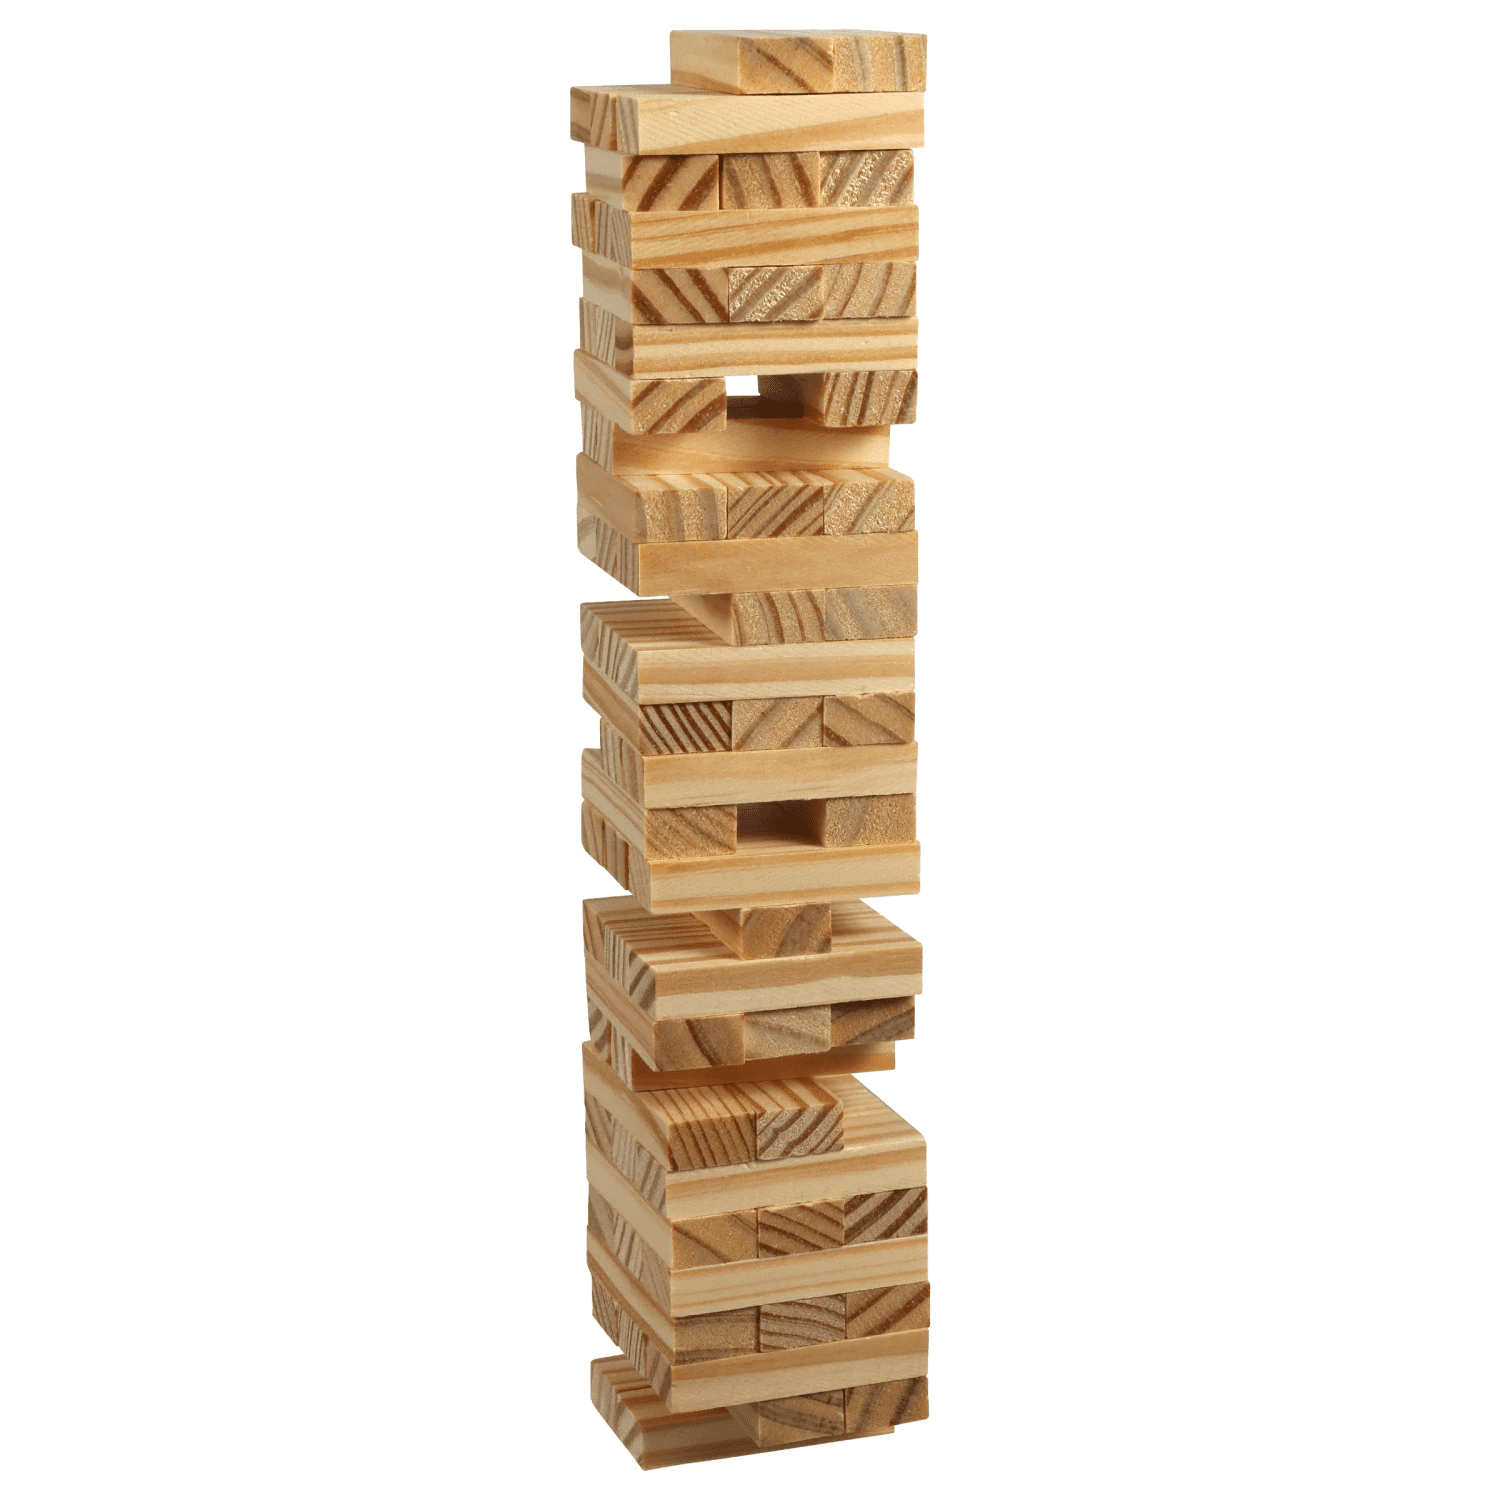 Details about   Giant Toppling Timbers Game Extra Large Wooden Stackable Blocks with Carry Bag 